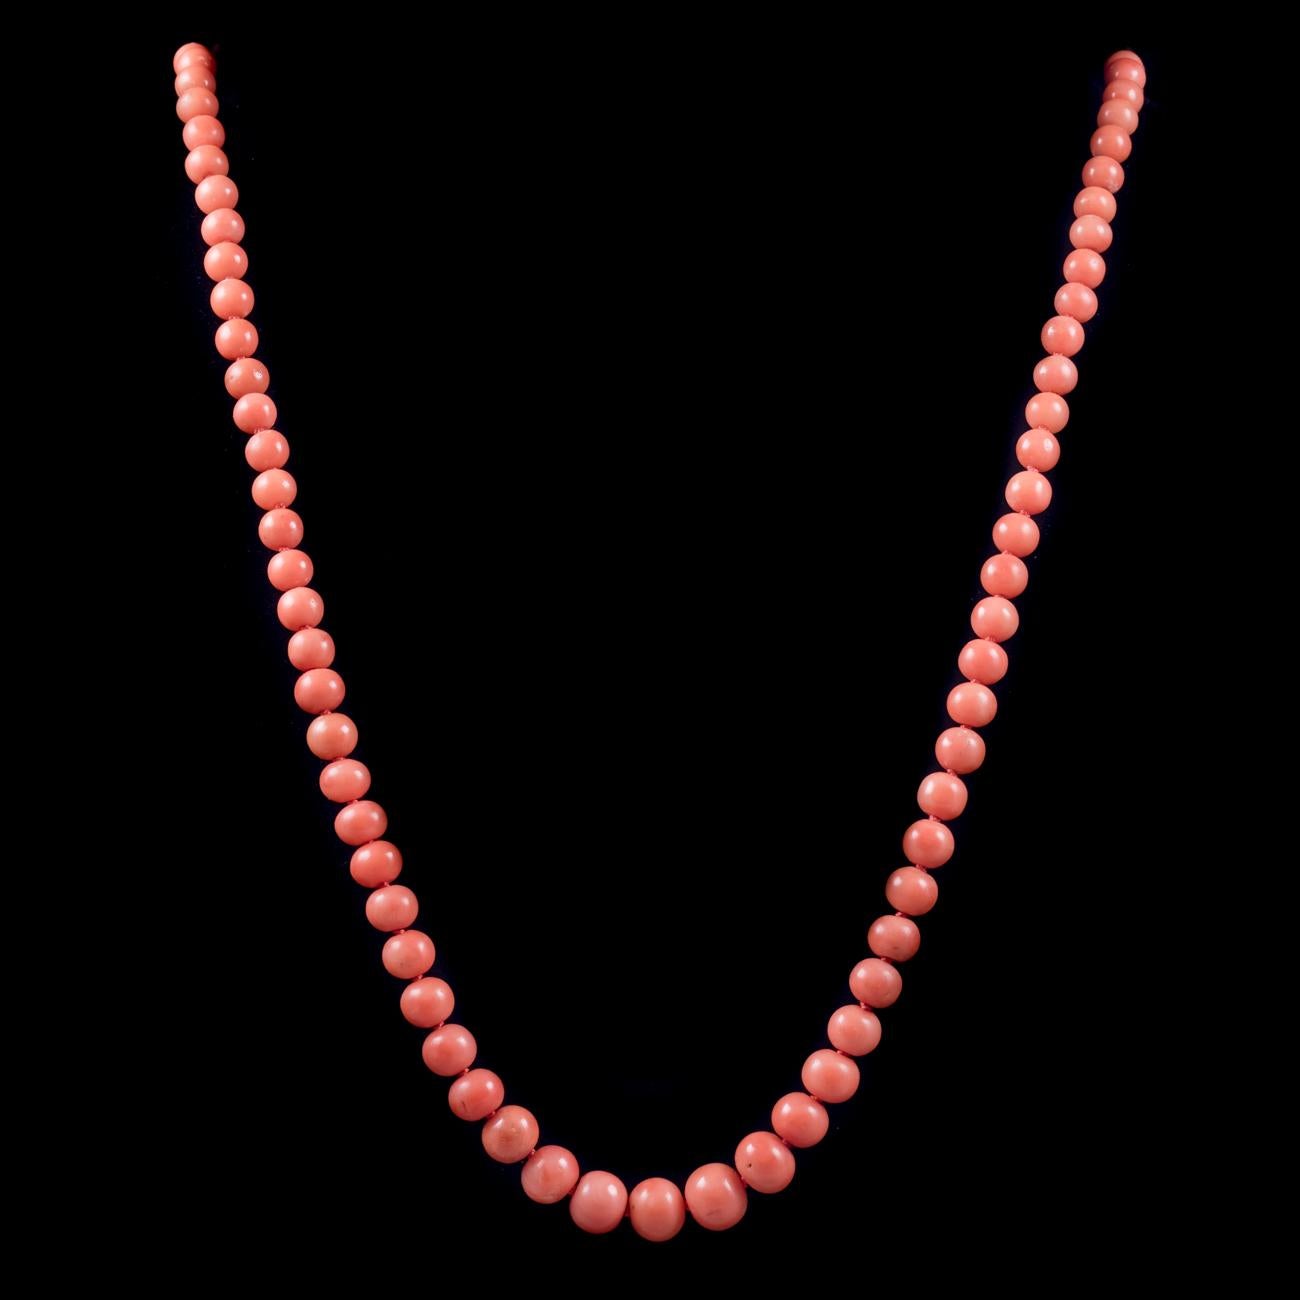 A wonderful antique Victorian necklace made up of beautiful natural Coral beads which graduate in size to a Gold box clasp also crowned with a Coral stone and fitted with a safety chain. The Coral stones range in shades of petal pink to velvety red